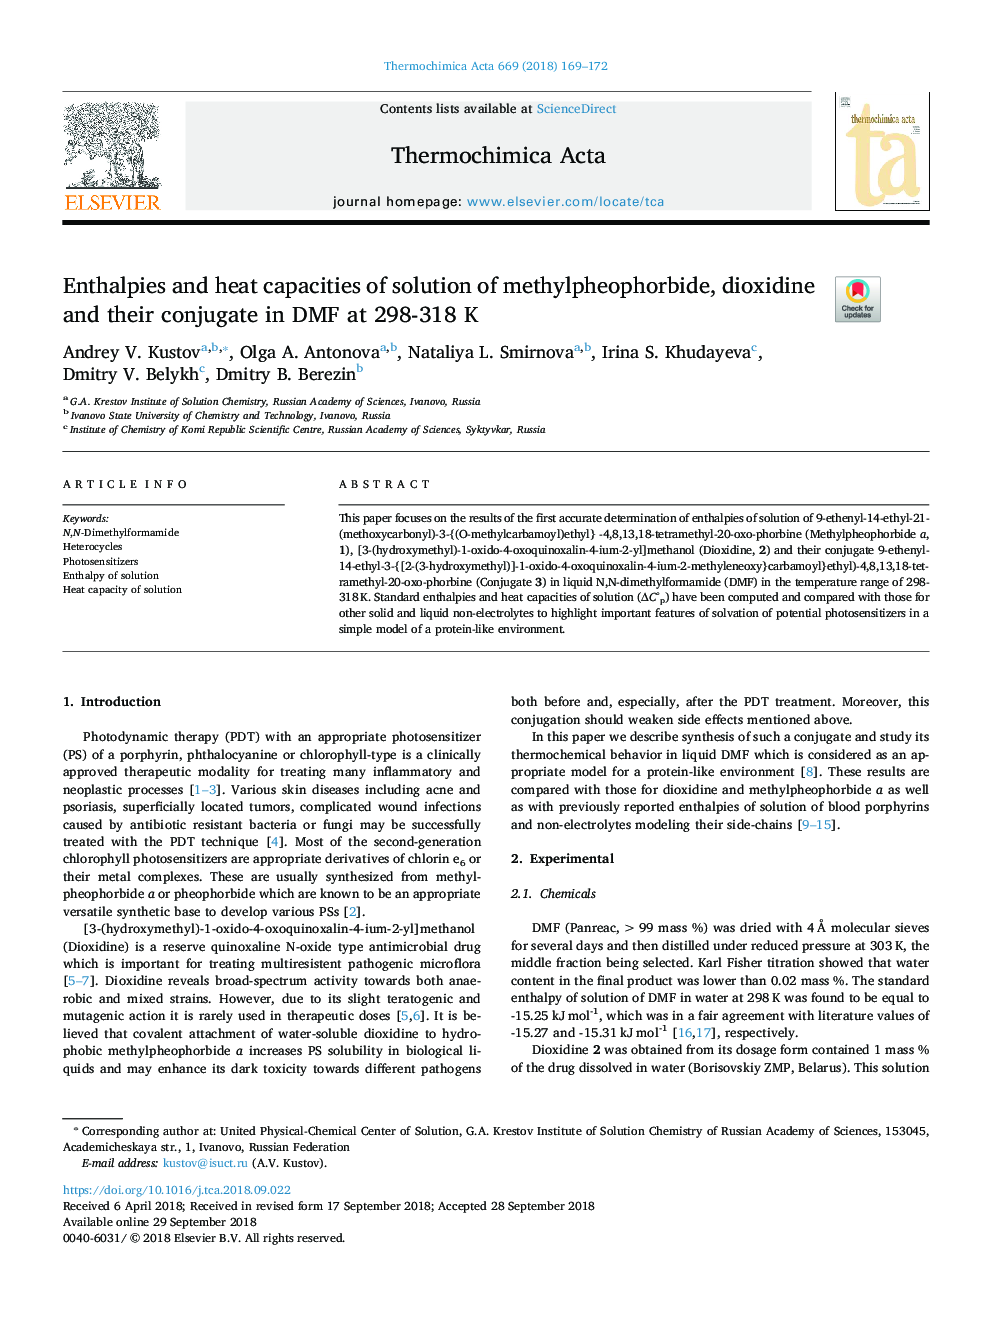 Enthalpies and heat capacities of solution of methylpheophorbide, dioxidine and their conjugate in DMF at 298-318 K